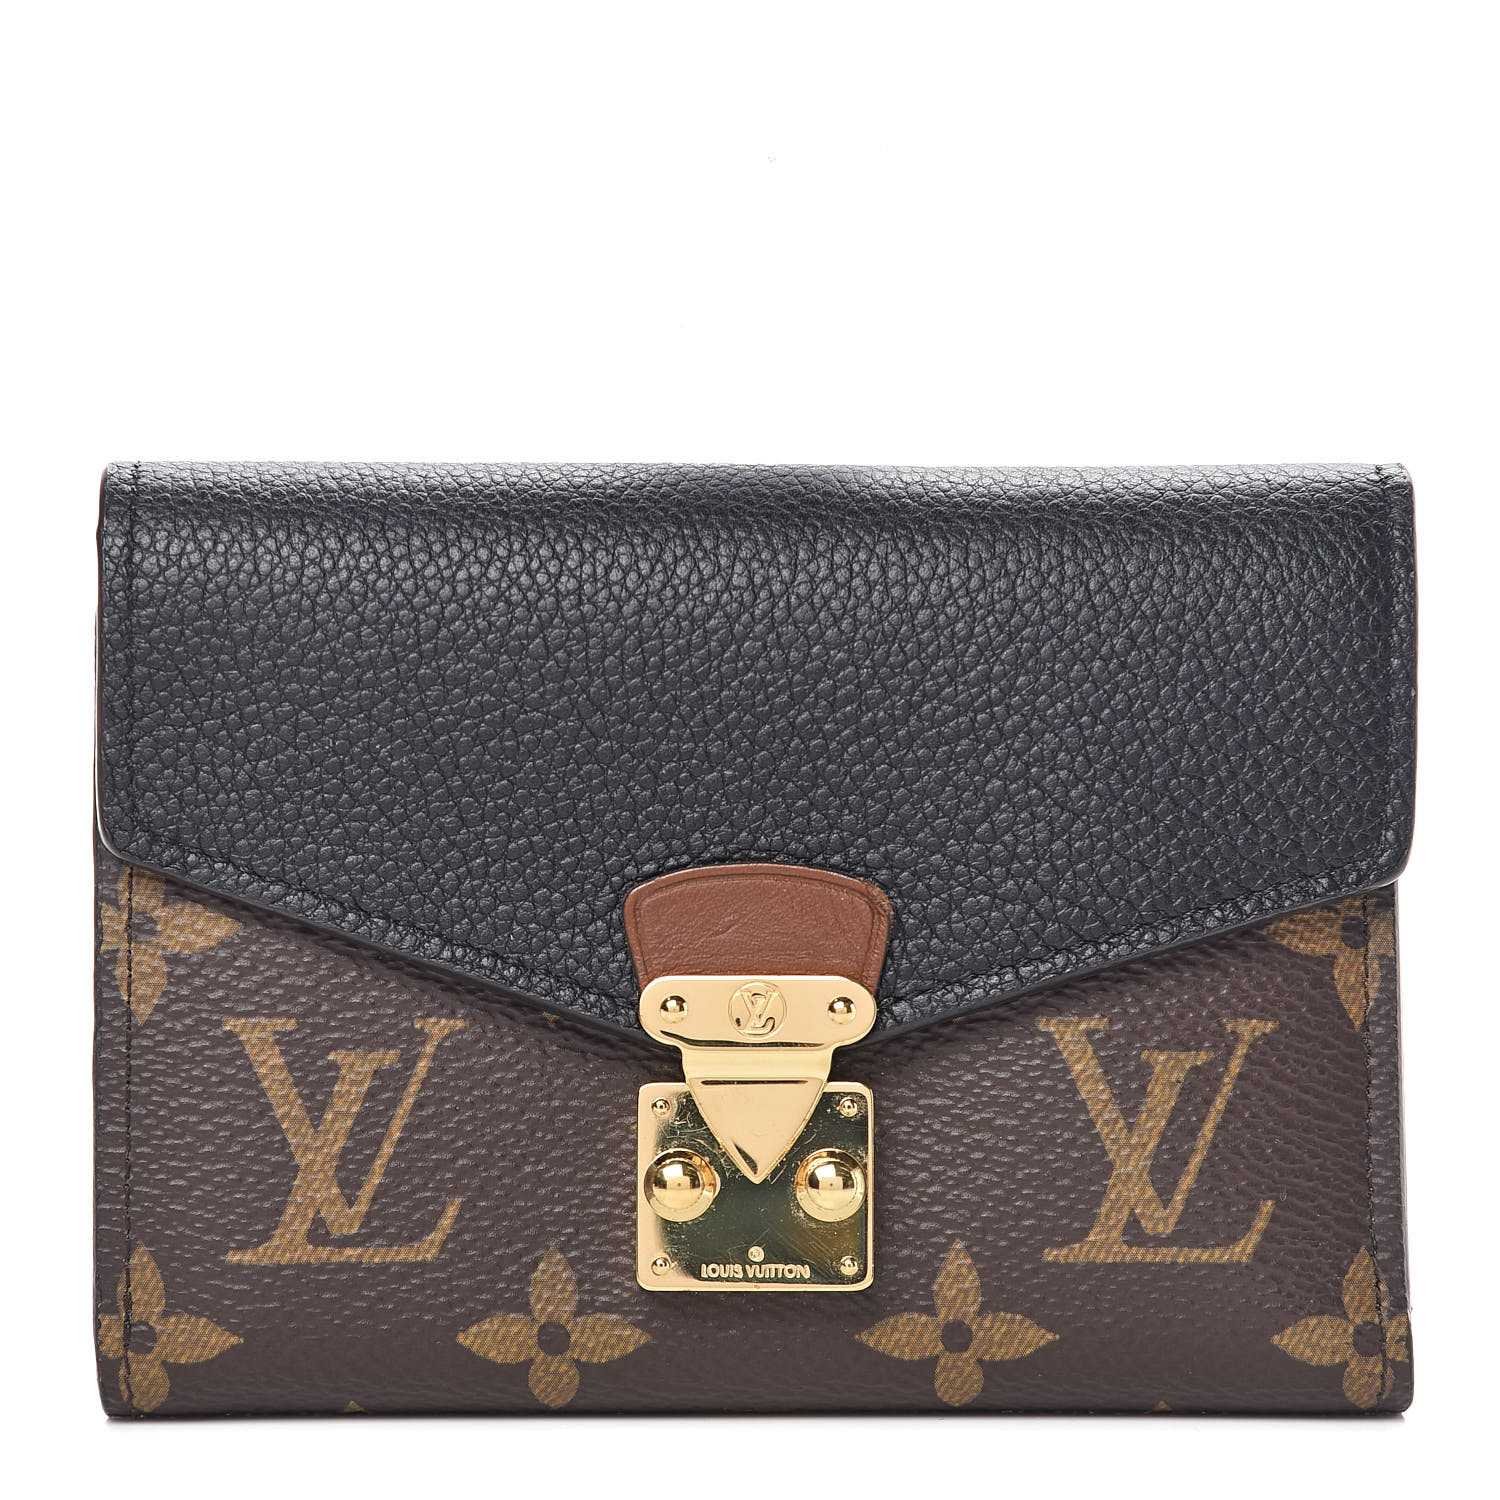 What Stores Sell Louis Vuitton Wallets For Men